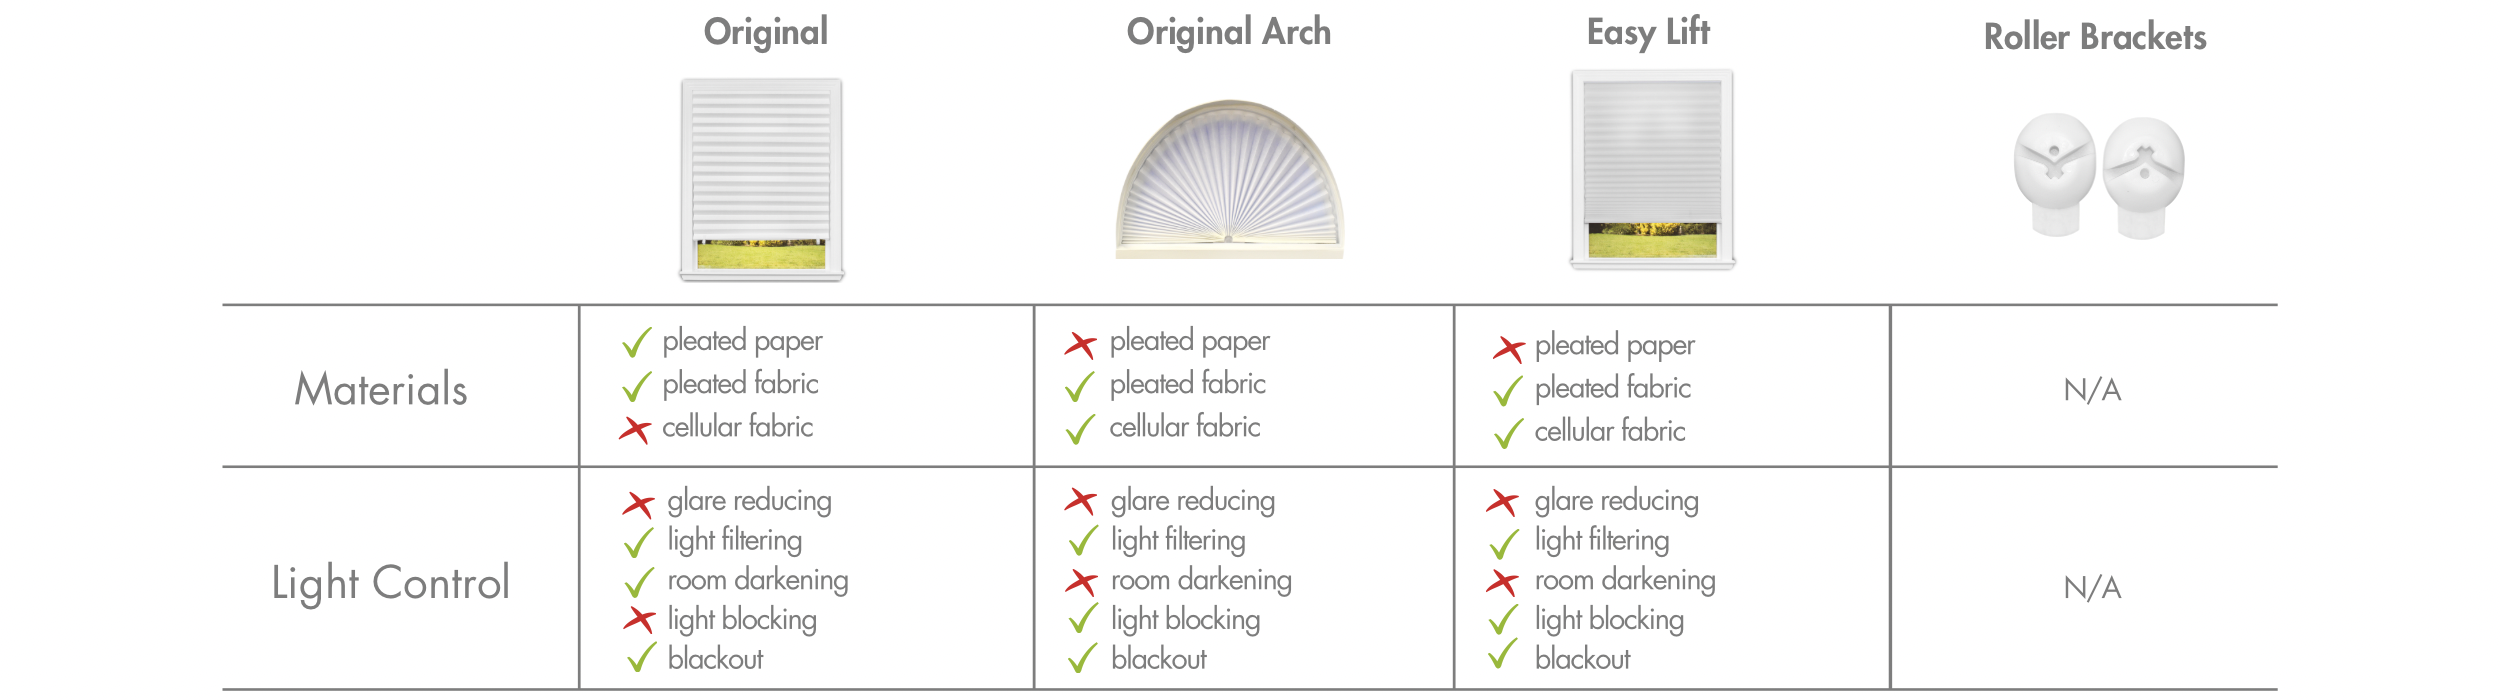 Roller Shade Adhesive Tape Archives 